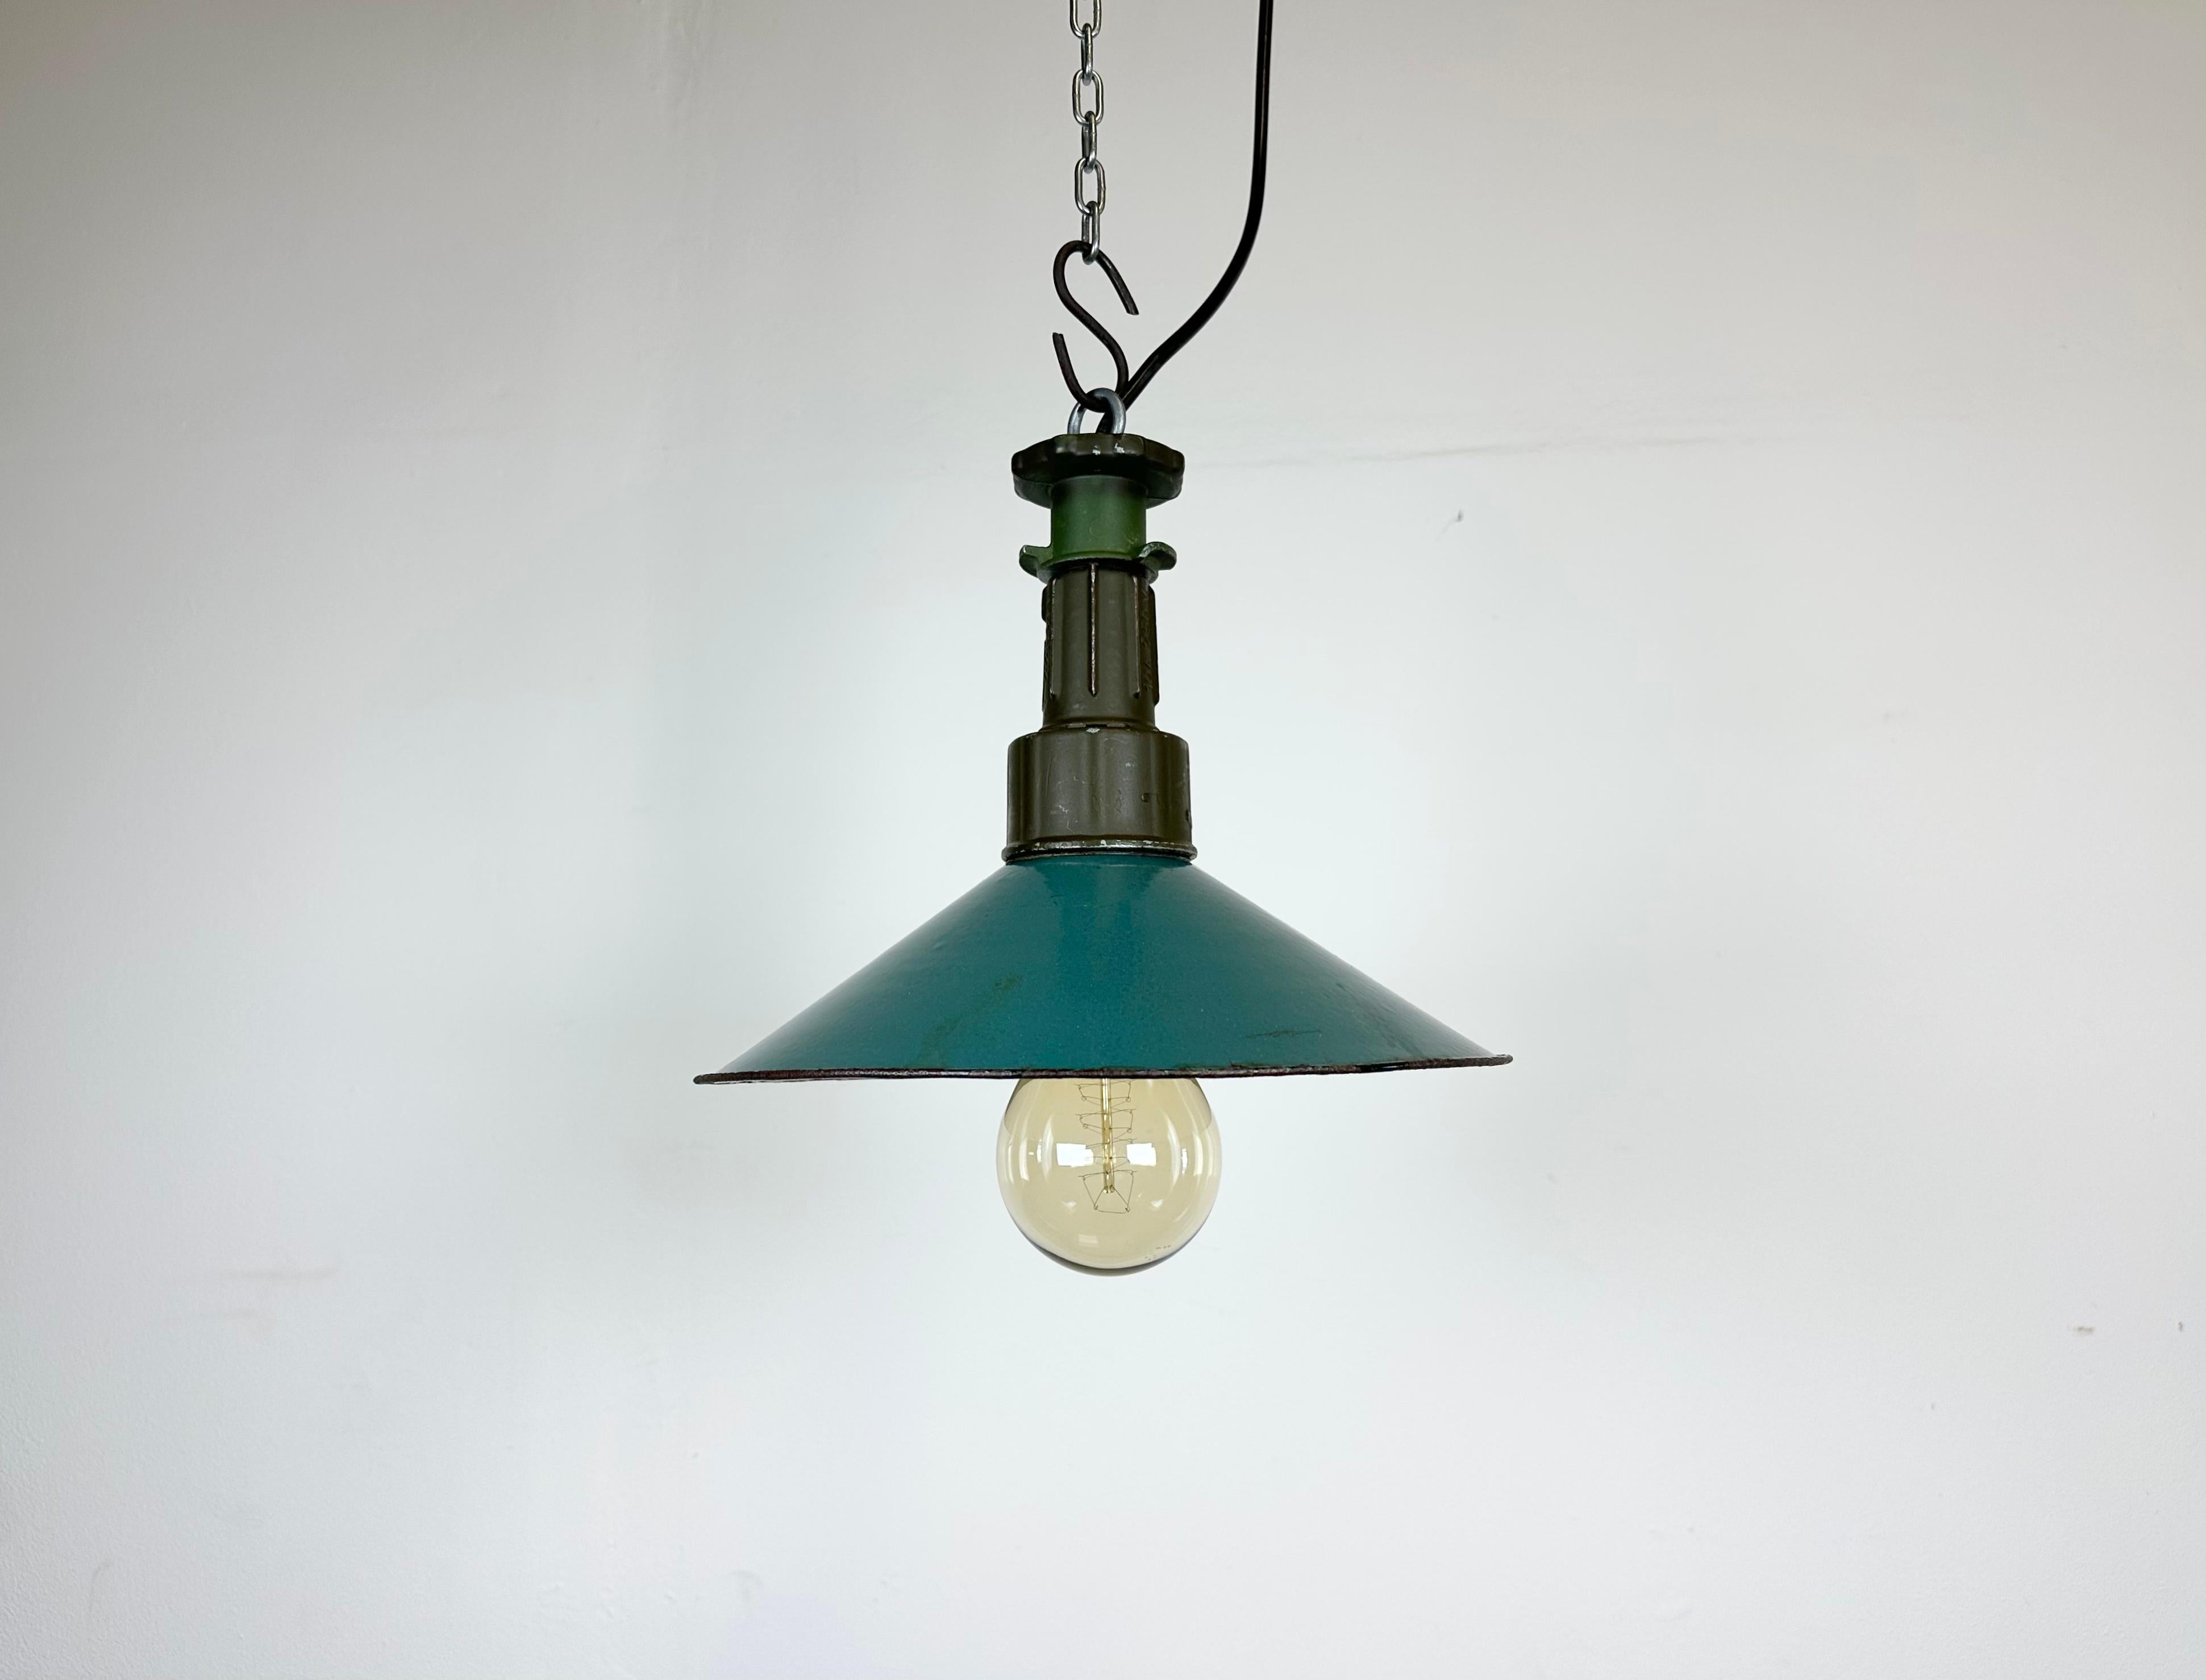 Industrial green enamel pendant light made in Poland during the 1960s. White enamel inside the shade. Green cast aluminium top. The socket requires E 27/ E26 light bulbs. New wire. The weight of the lamp is 0,5 kg.
The light bulb is not included.